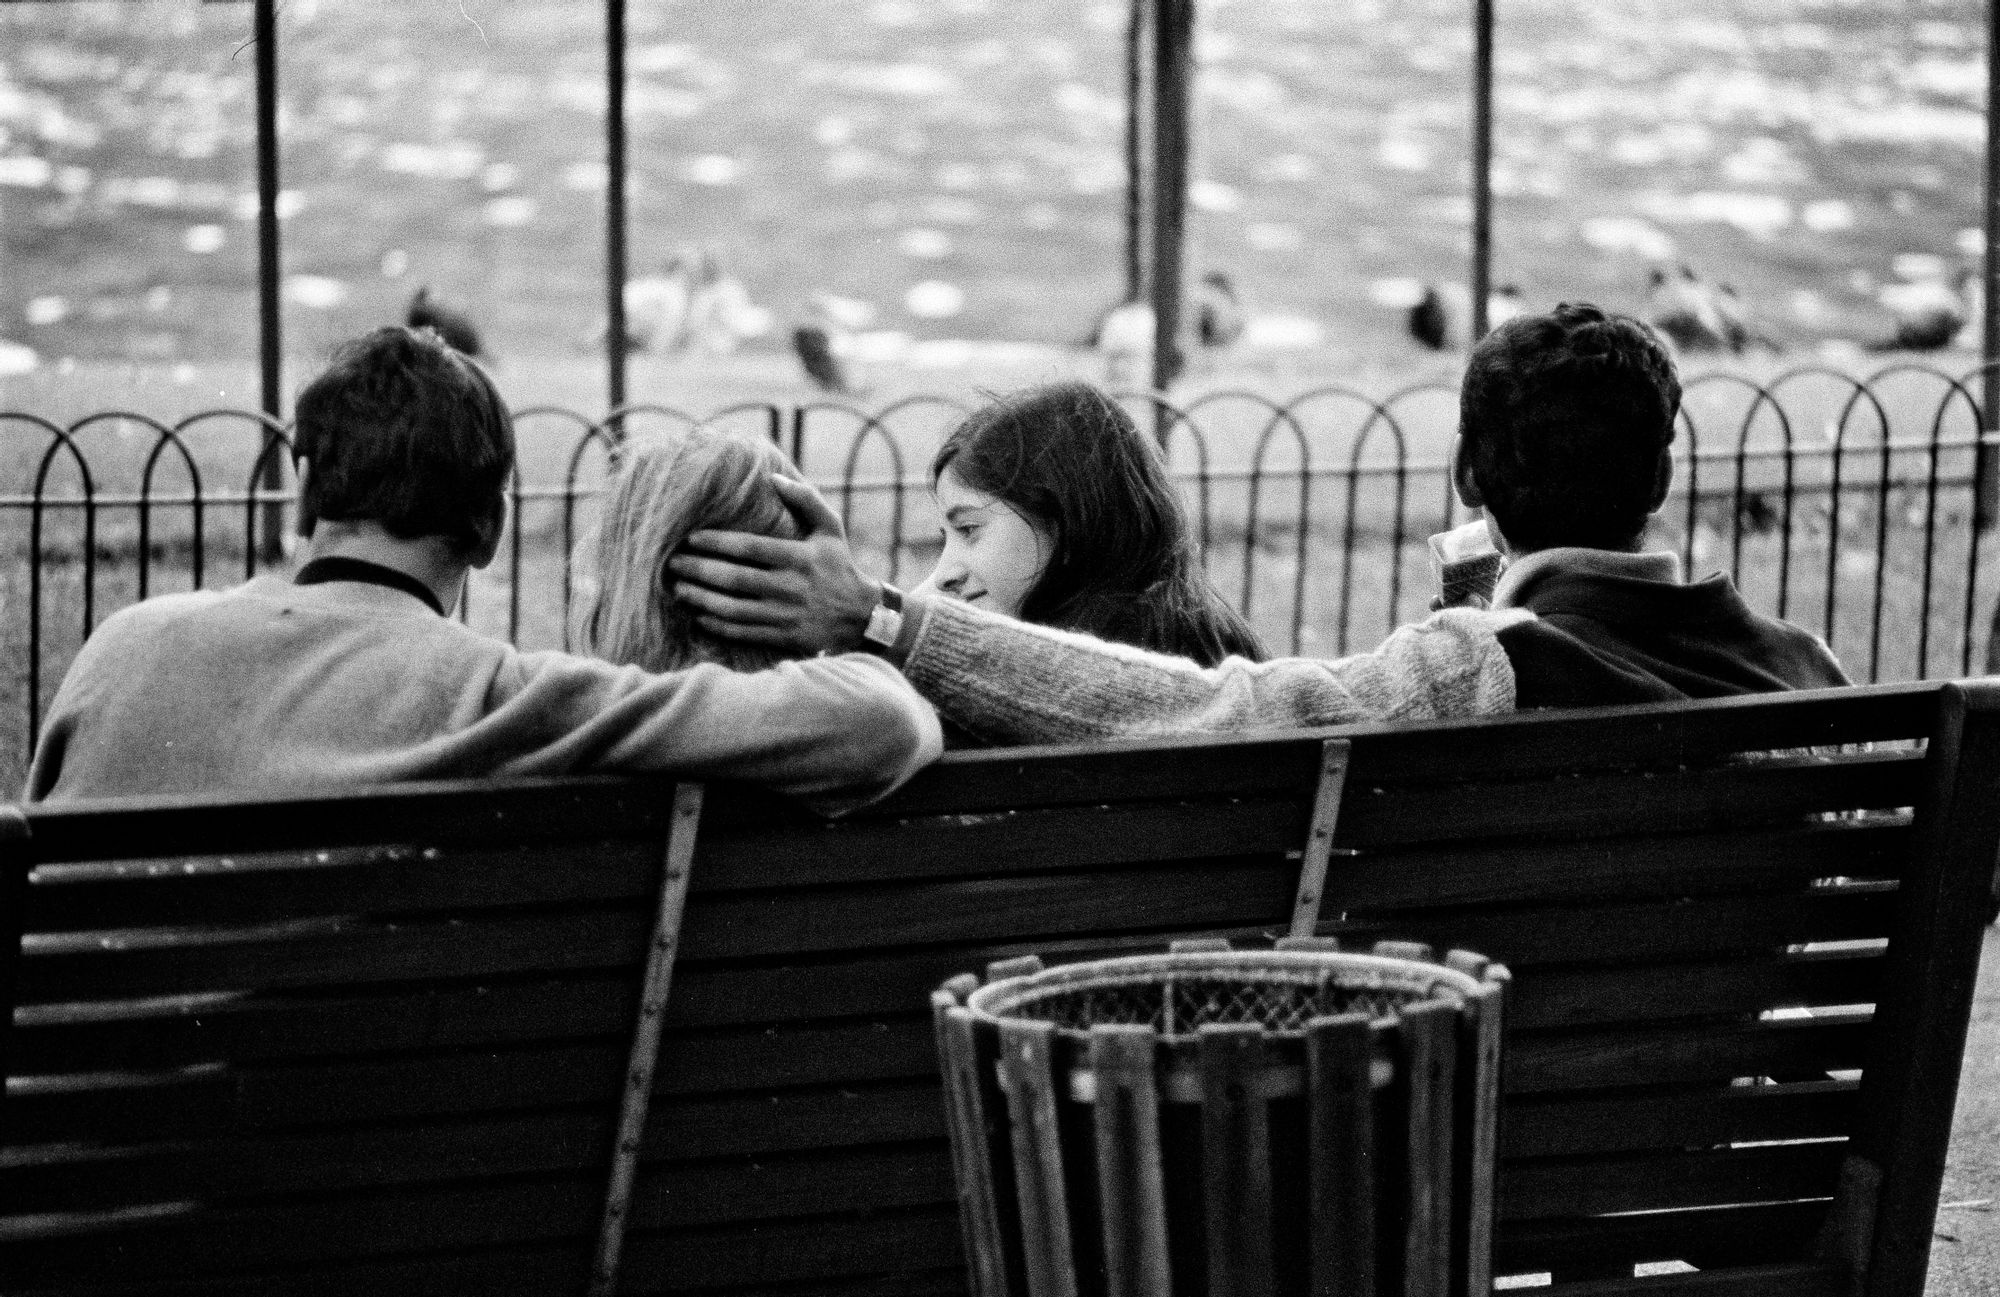 S_BW_Couples_On_Bench_Backs_Final